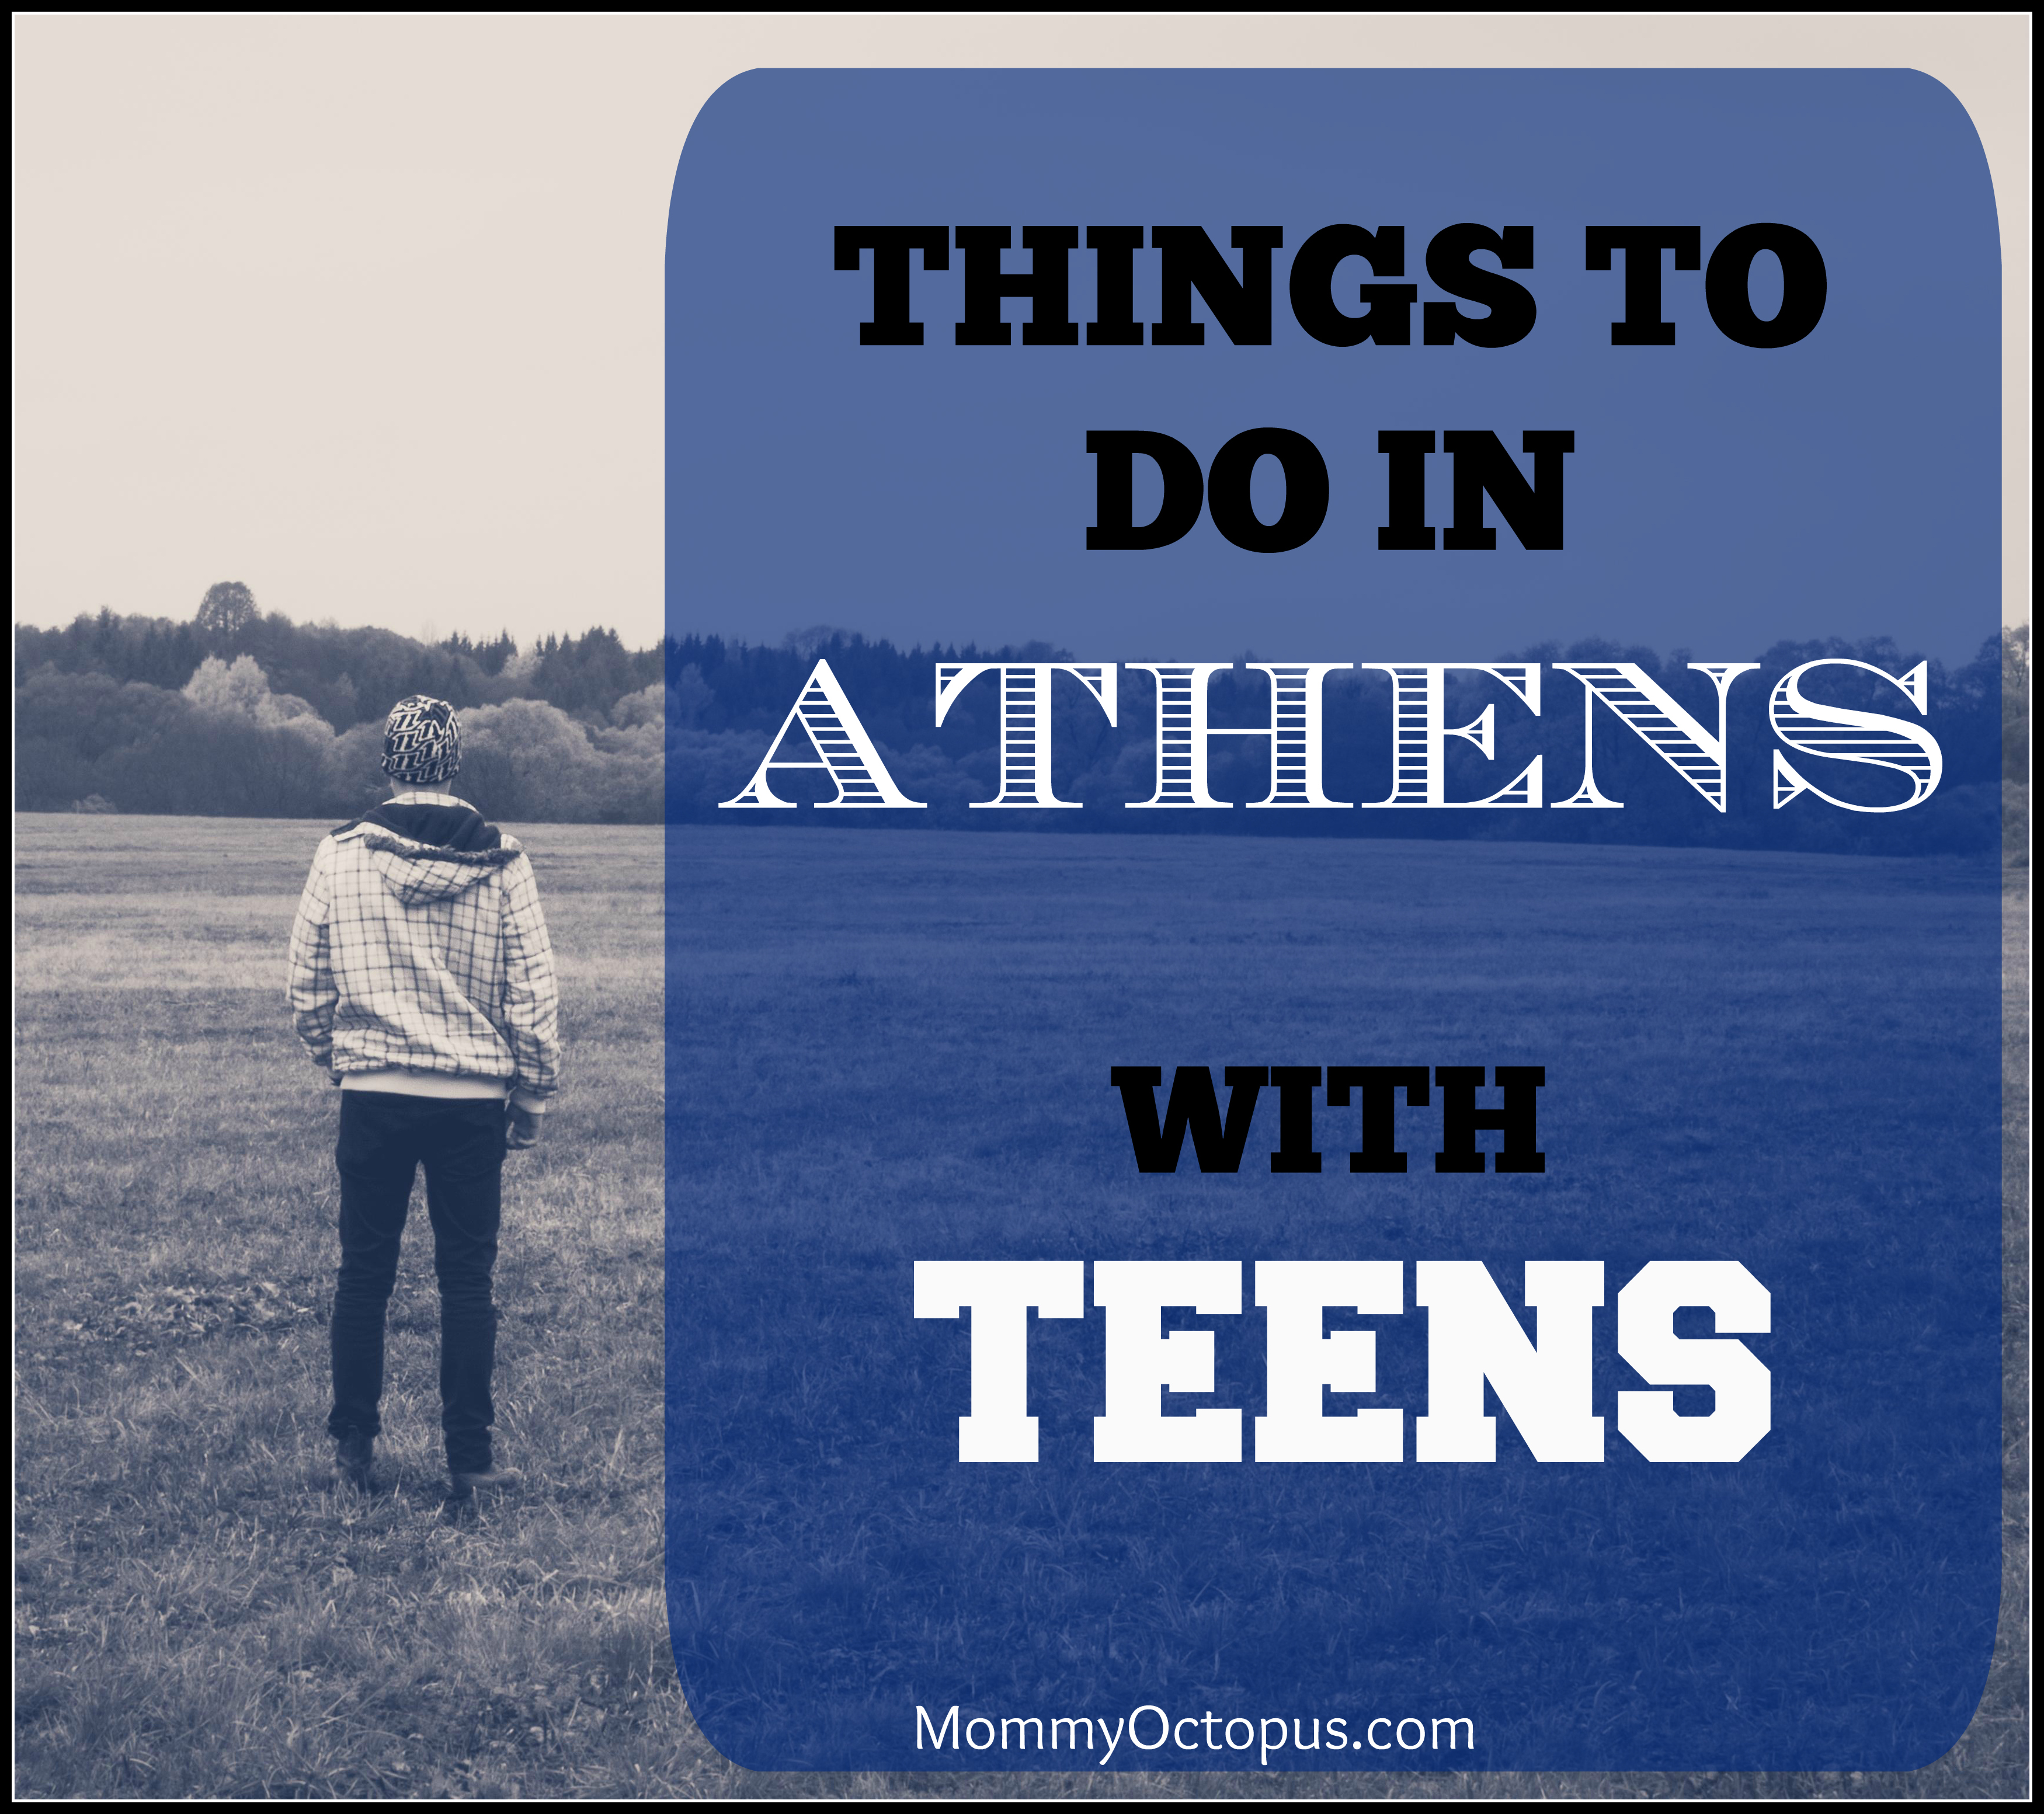 Dating for teens in Athens